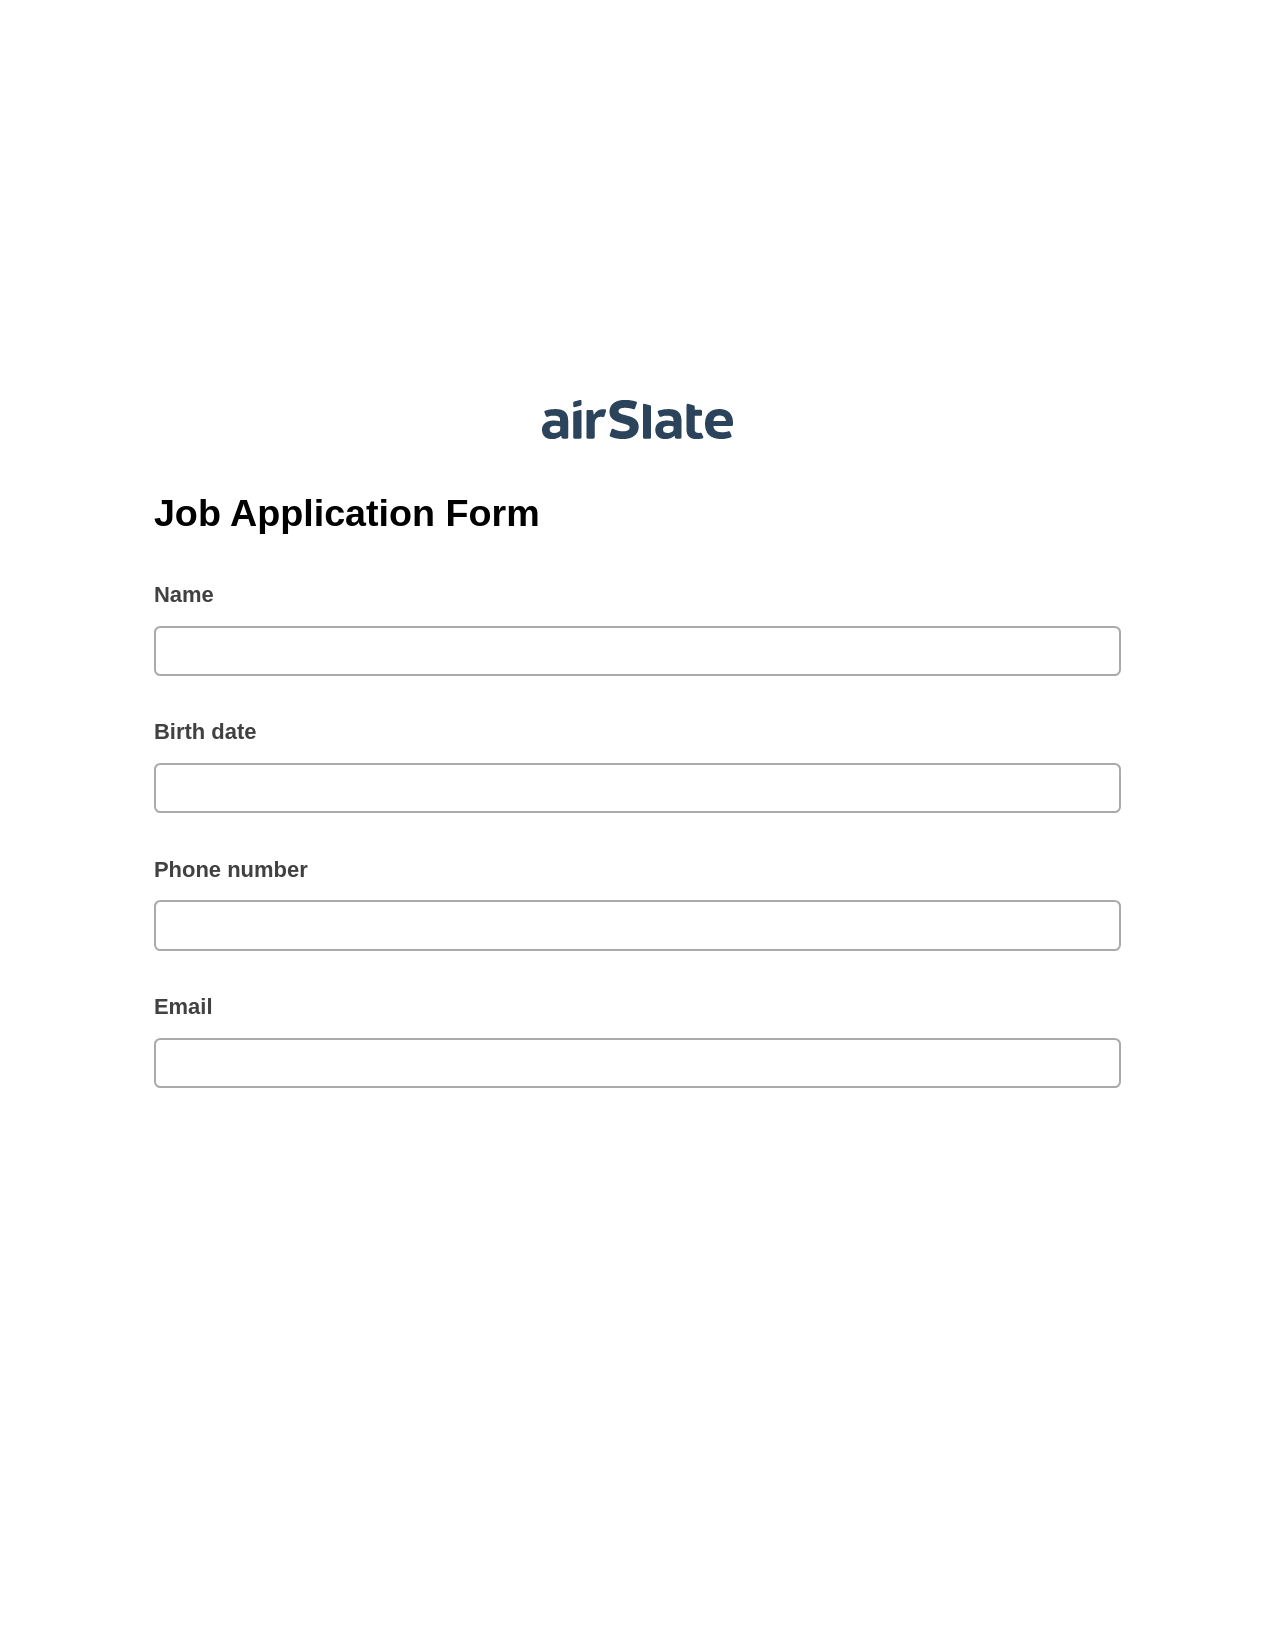 Multirole Job Application Form Pre-fill from NetSuite Records Bot, Create slate addon, Export to Google Sheet Bot